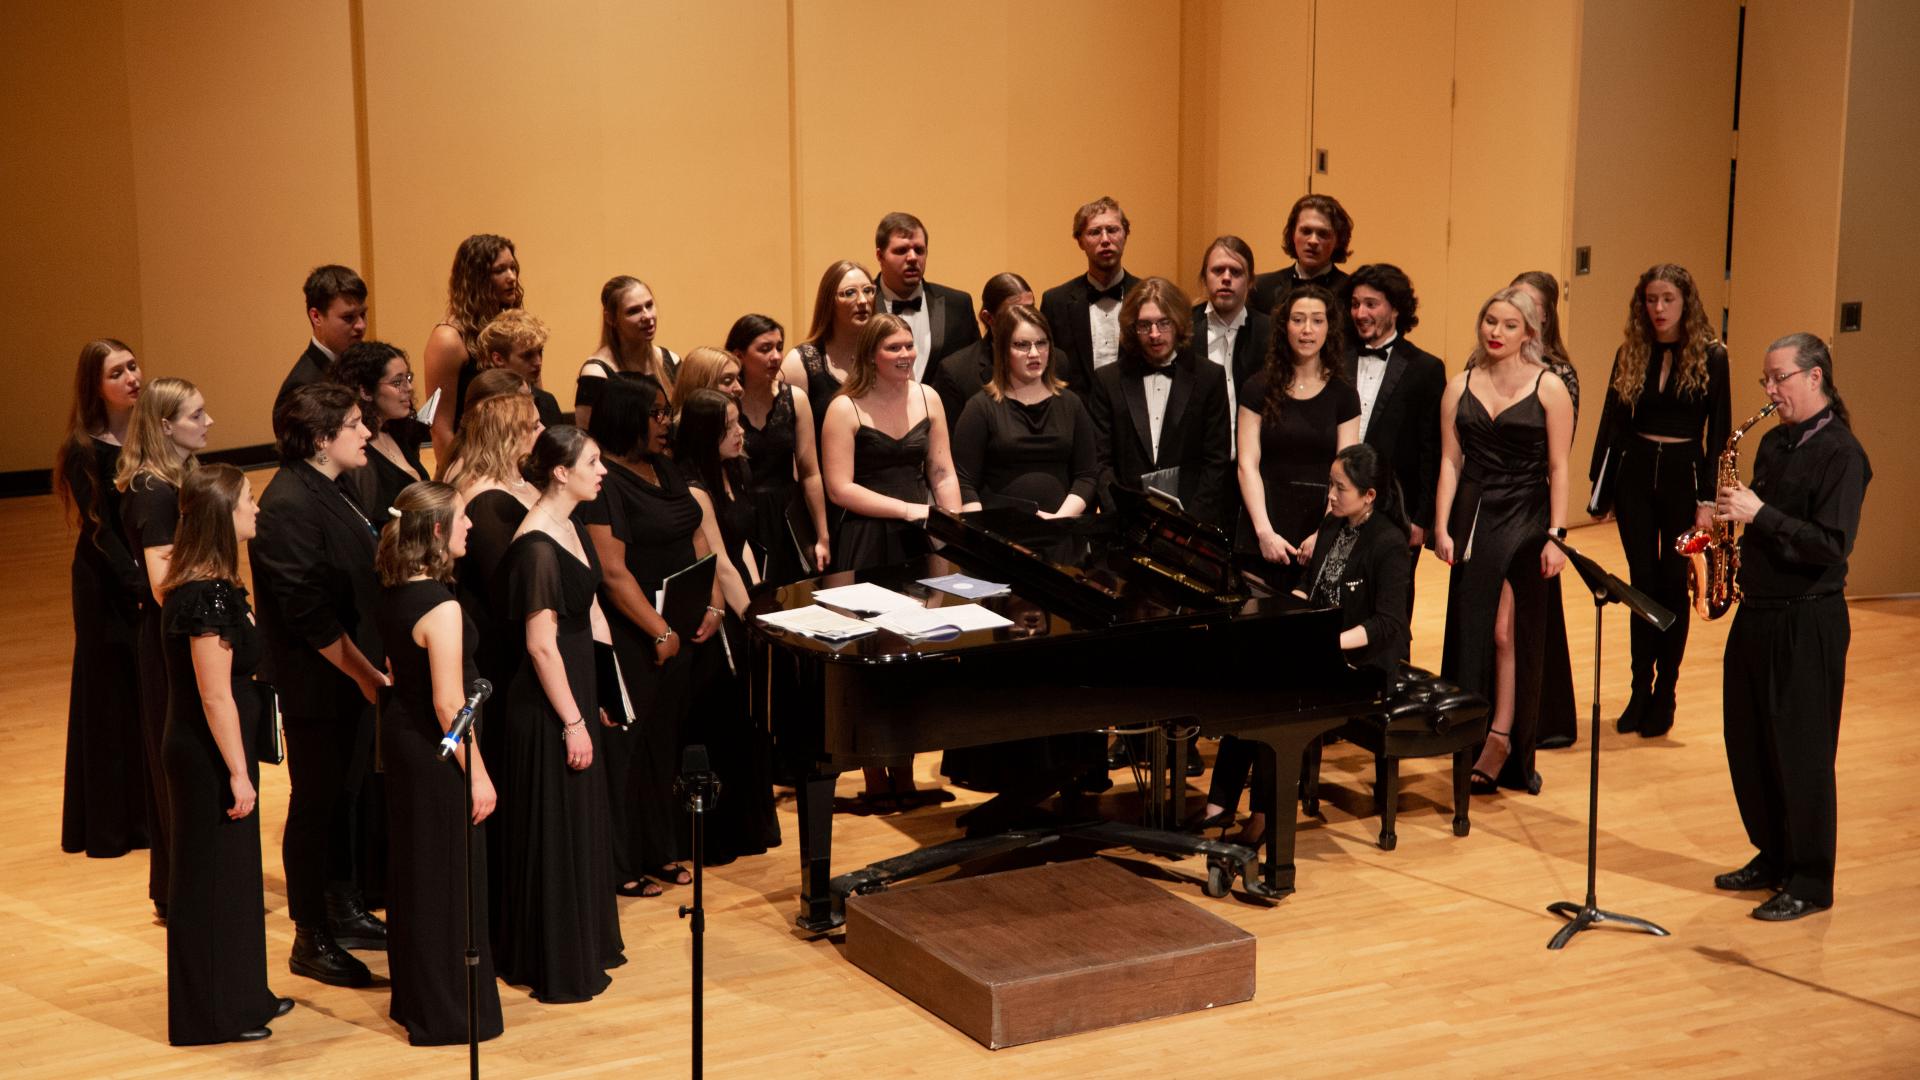 mercyhurst concert choir sings around a grand piano on stage